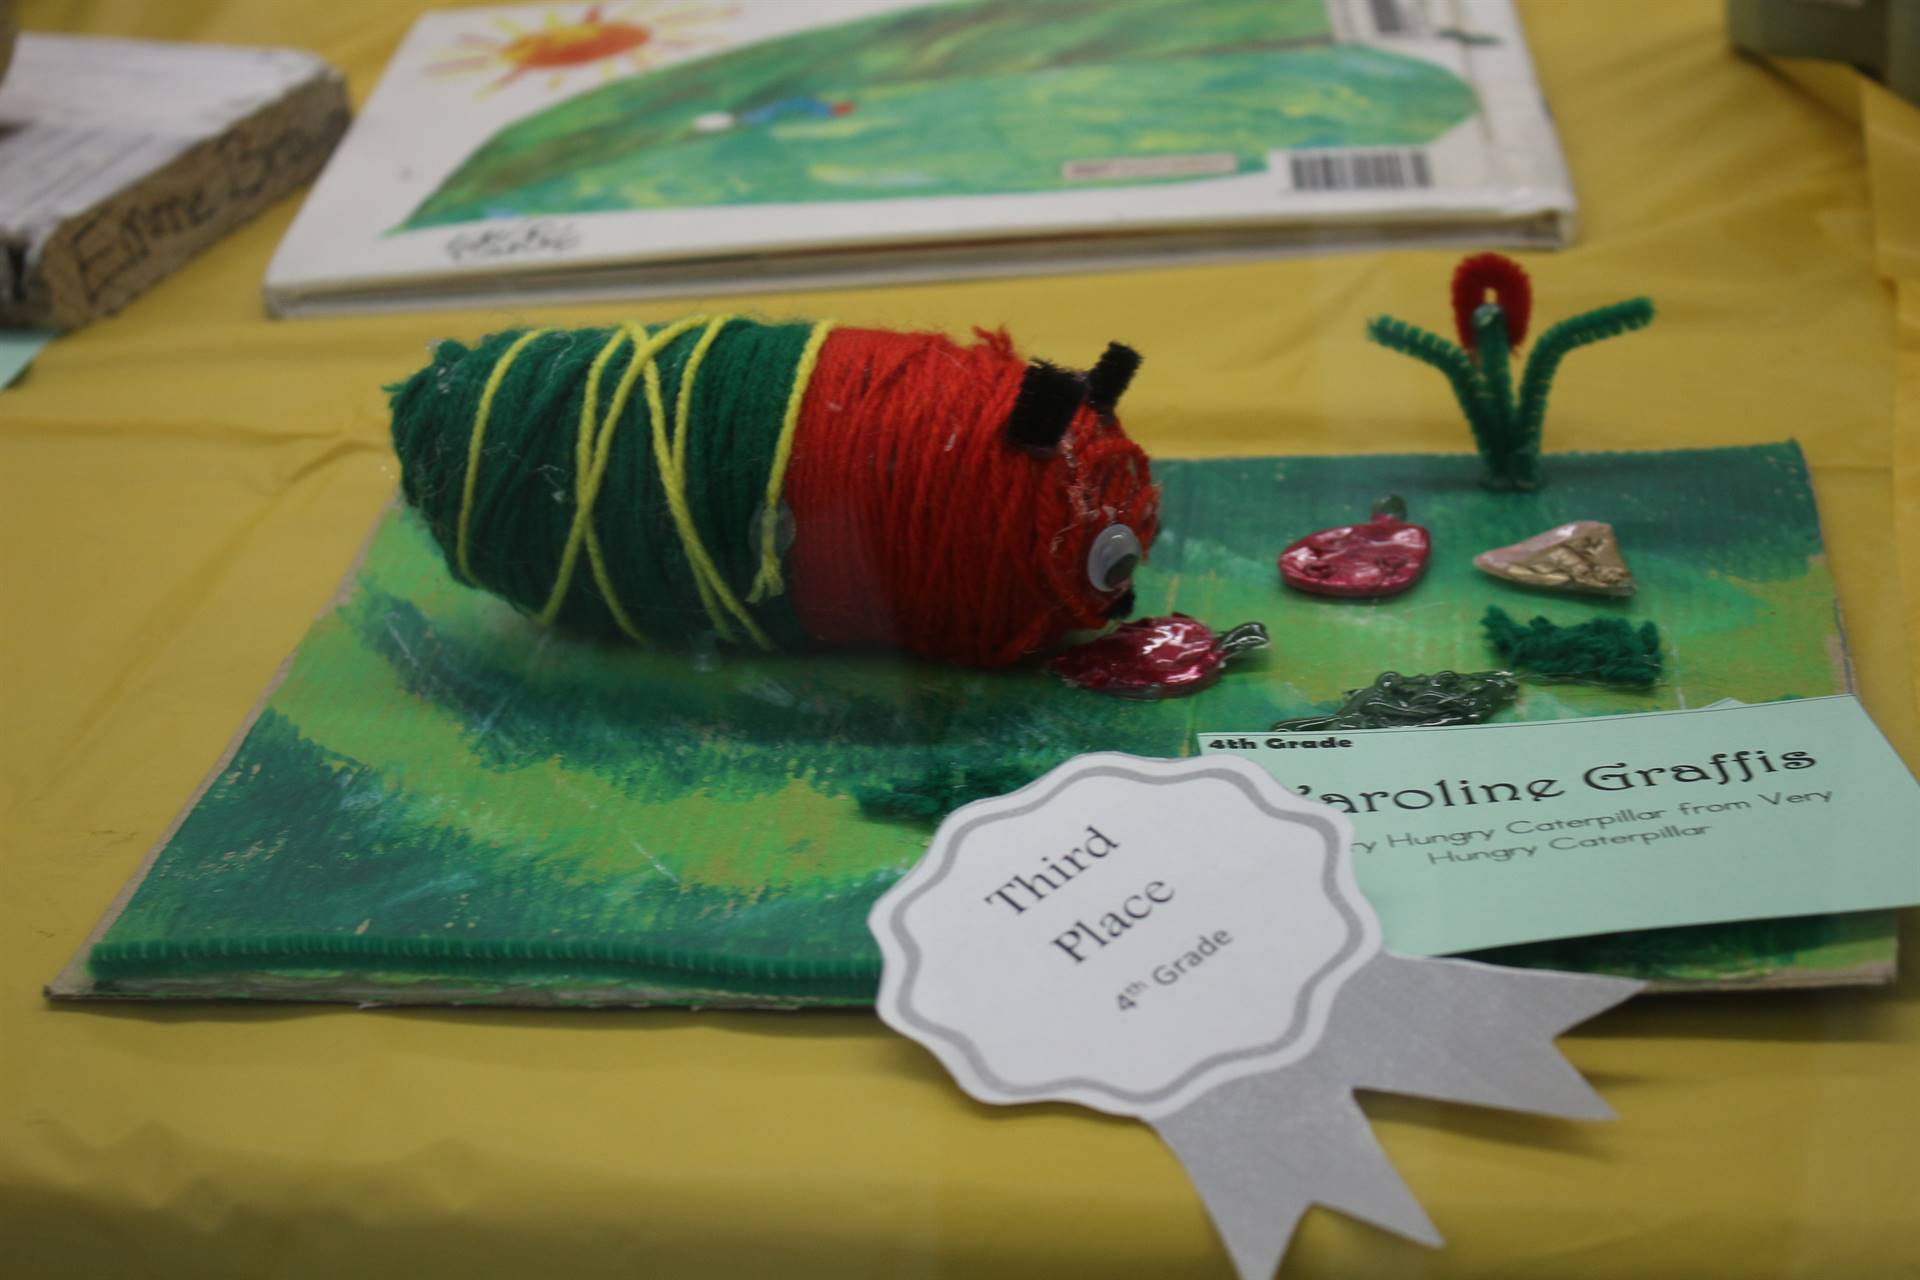 3rd Place: Very Hungry Caterpillar by Caroline Graffis